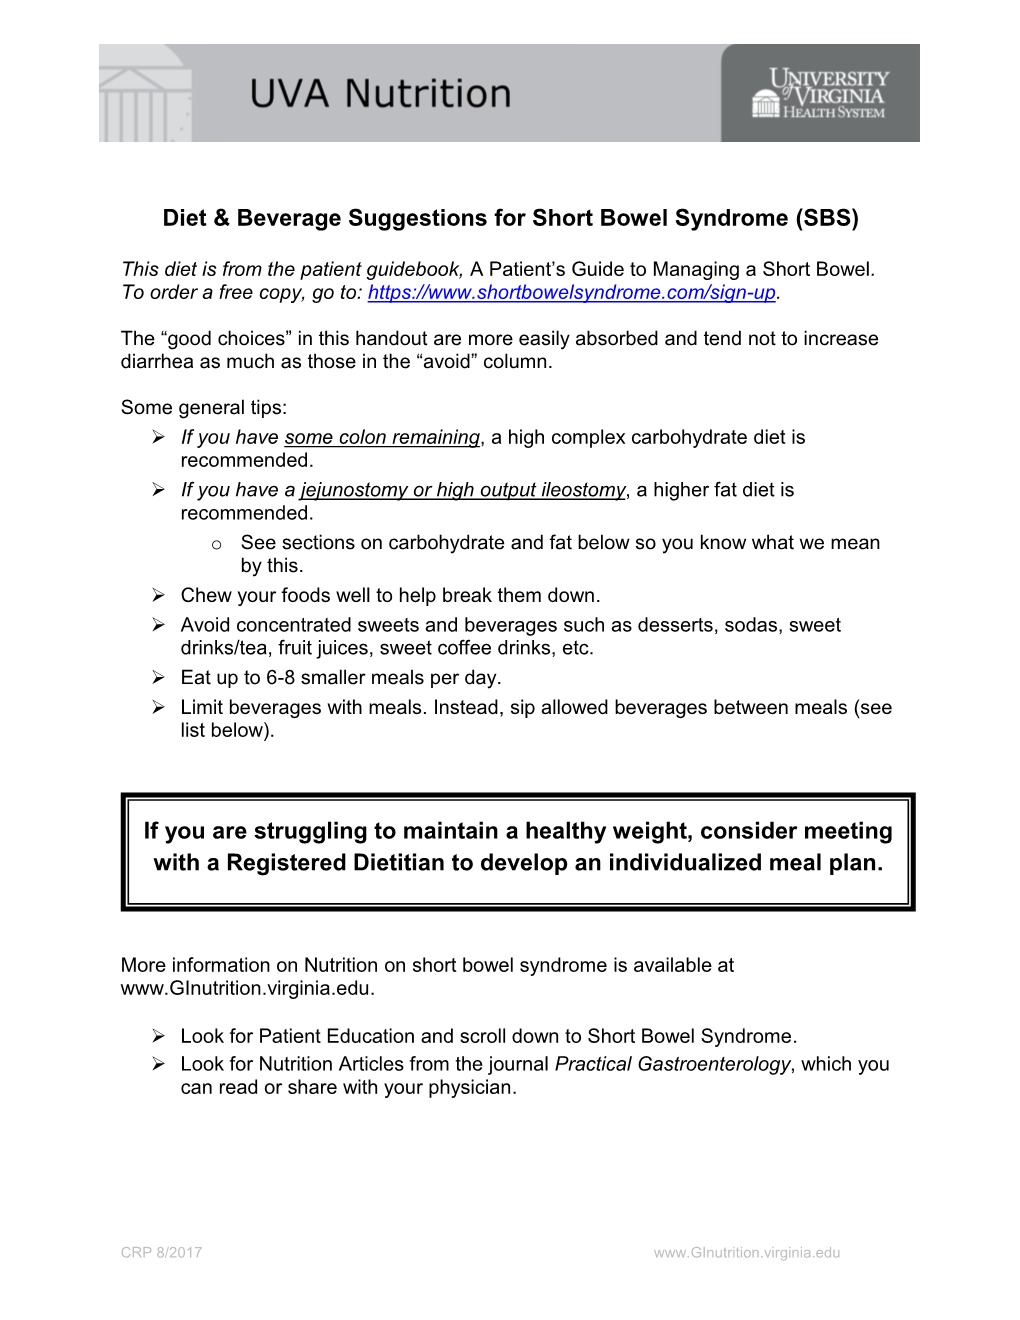 Diet & Beverage Suggestions for Short Bowel Syndrome (SBS)